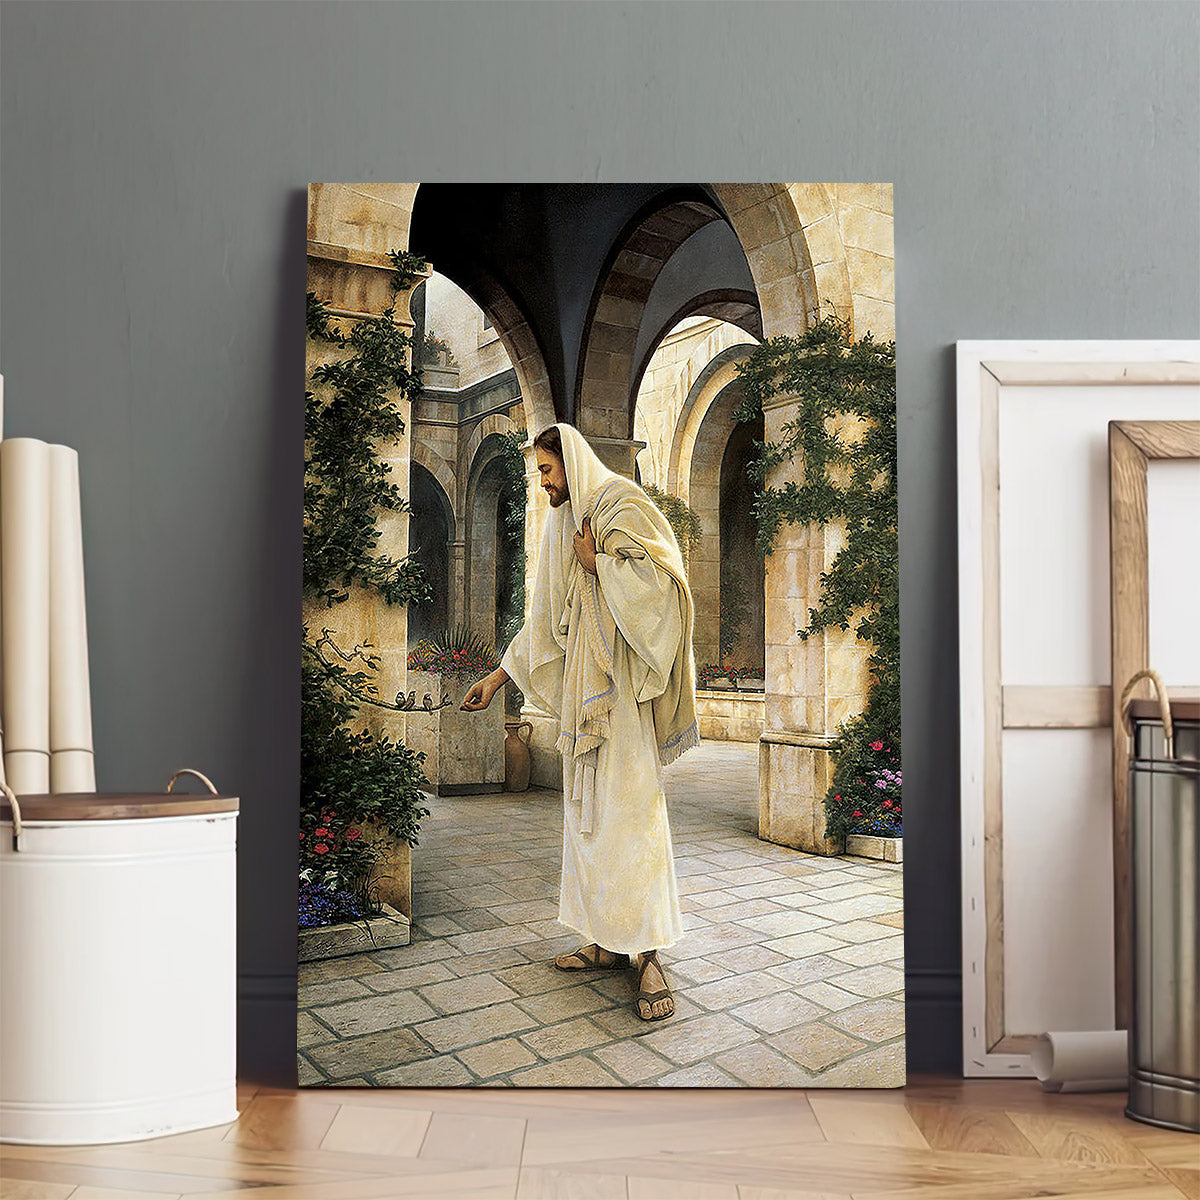 In His Constant Care  Canvas Wall Art - Jesus Canvas Pictures - Christian Wall Art